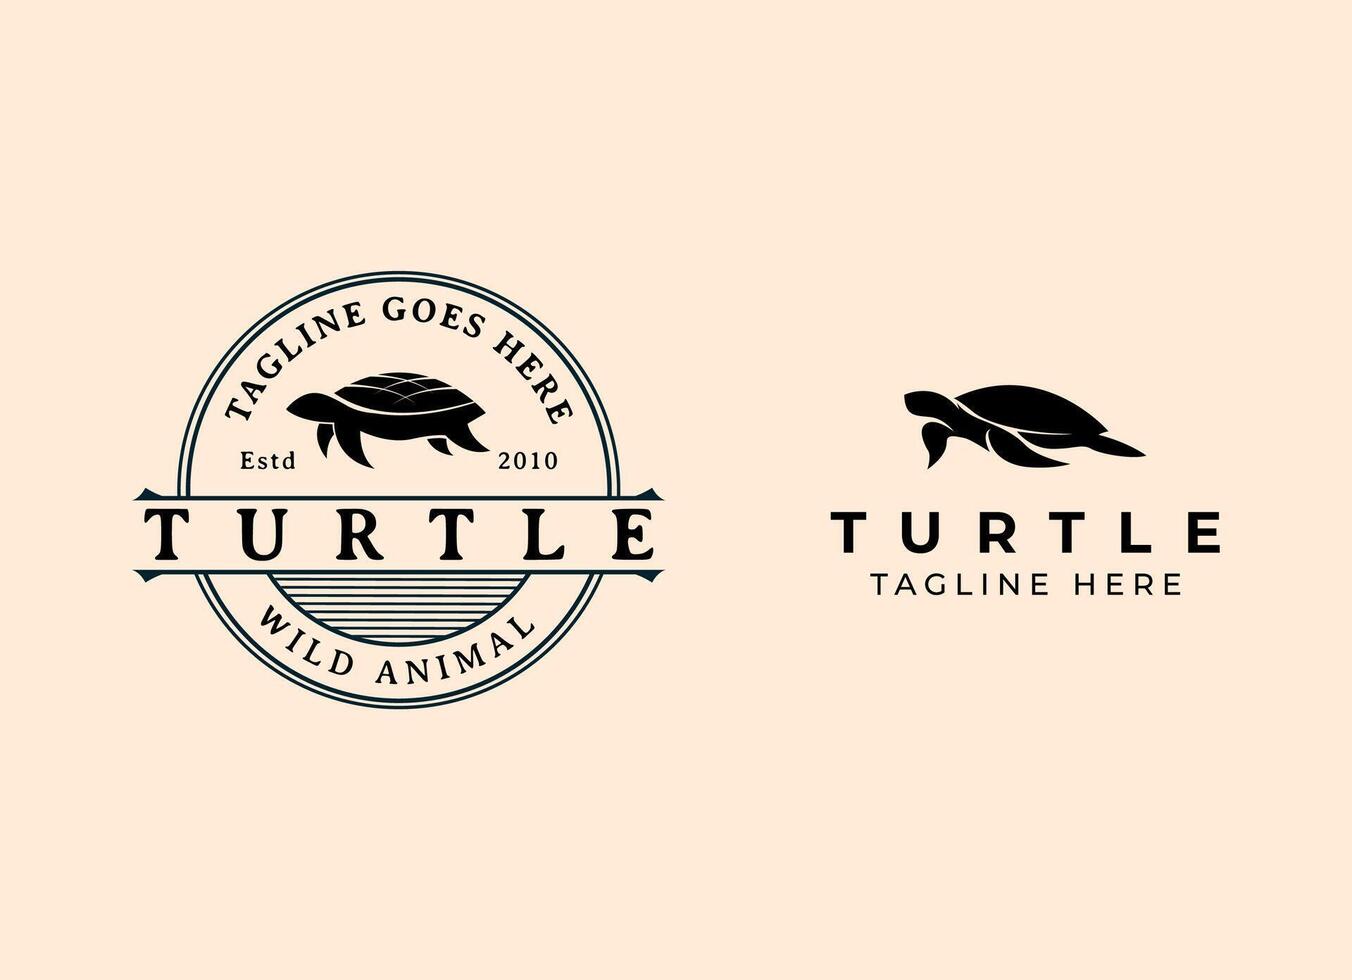 Turtle in the beach and sunset logo vector illustration